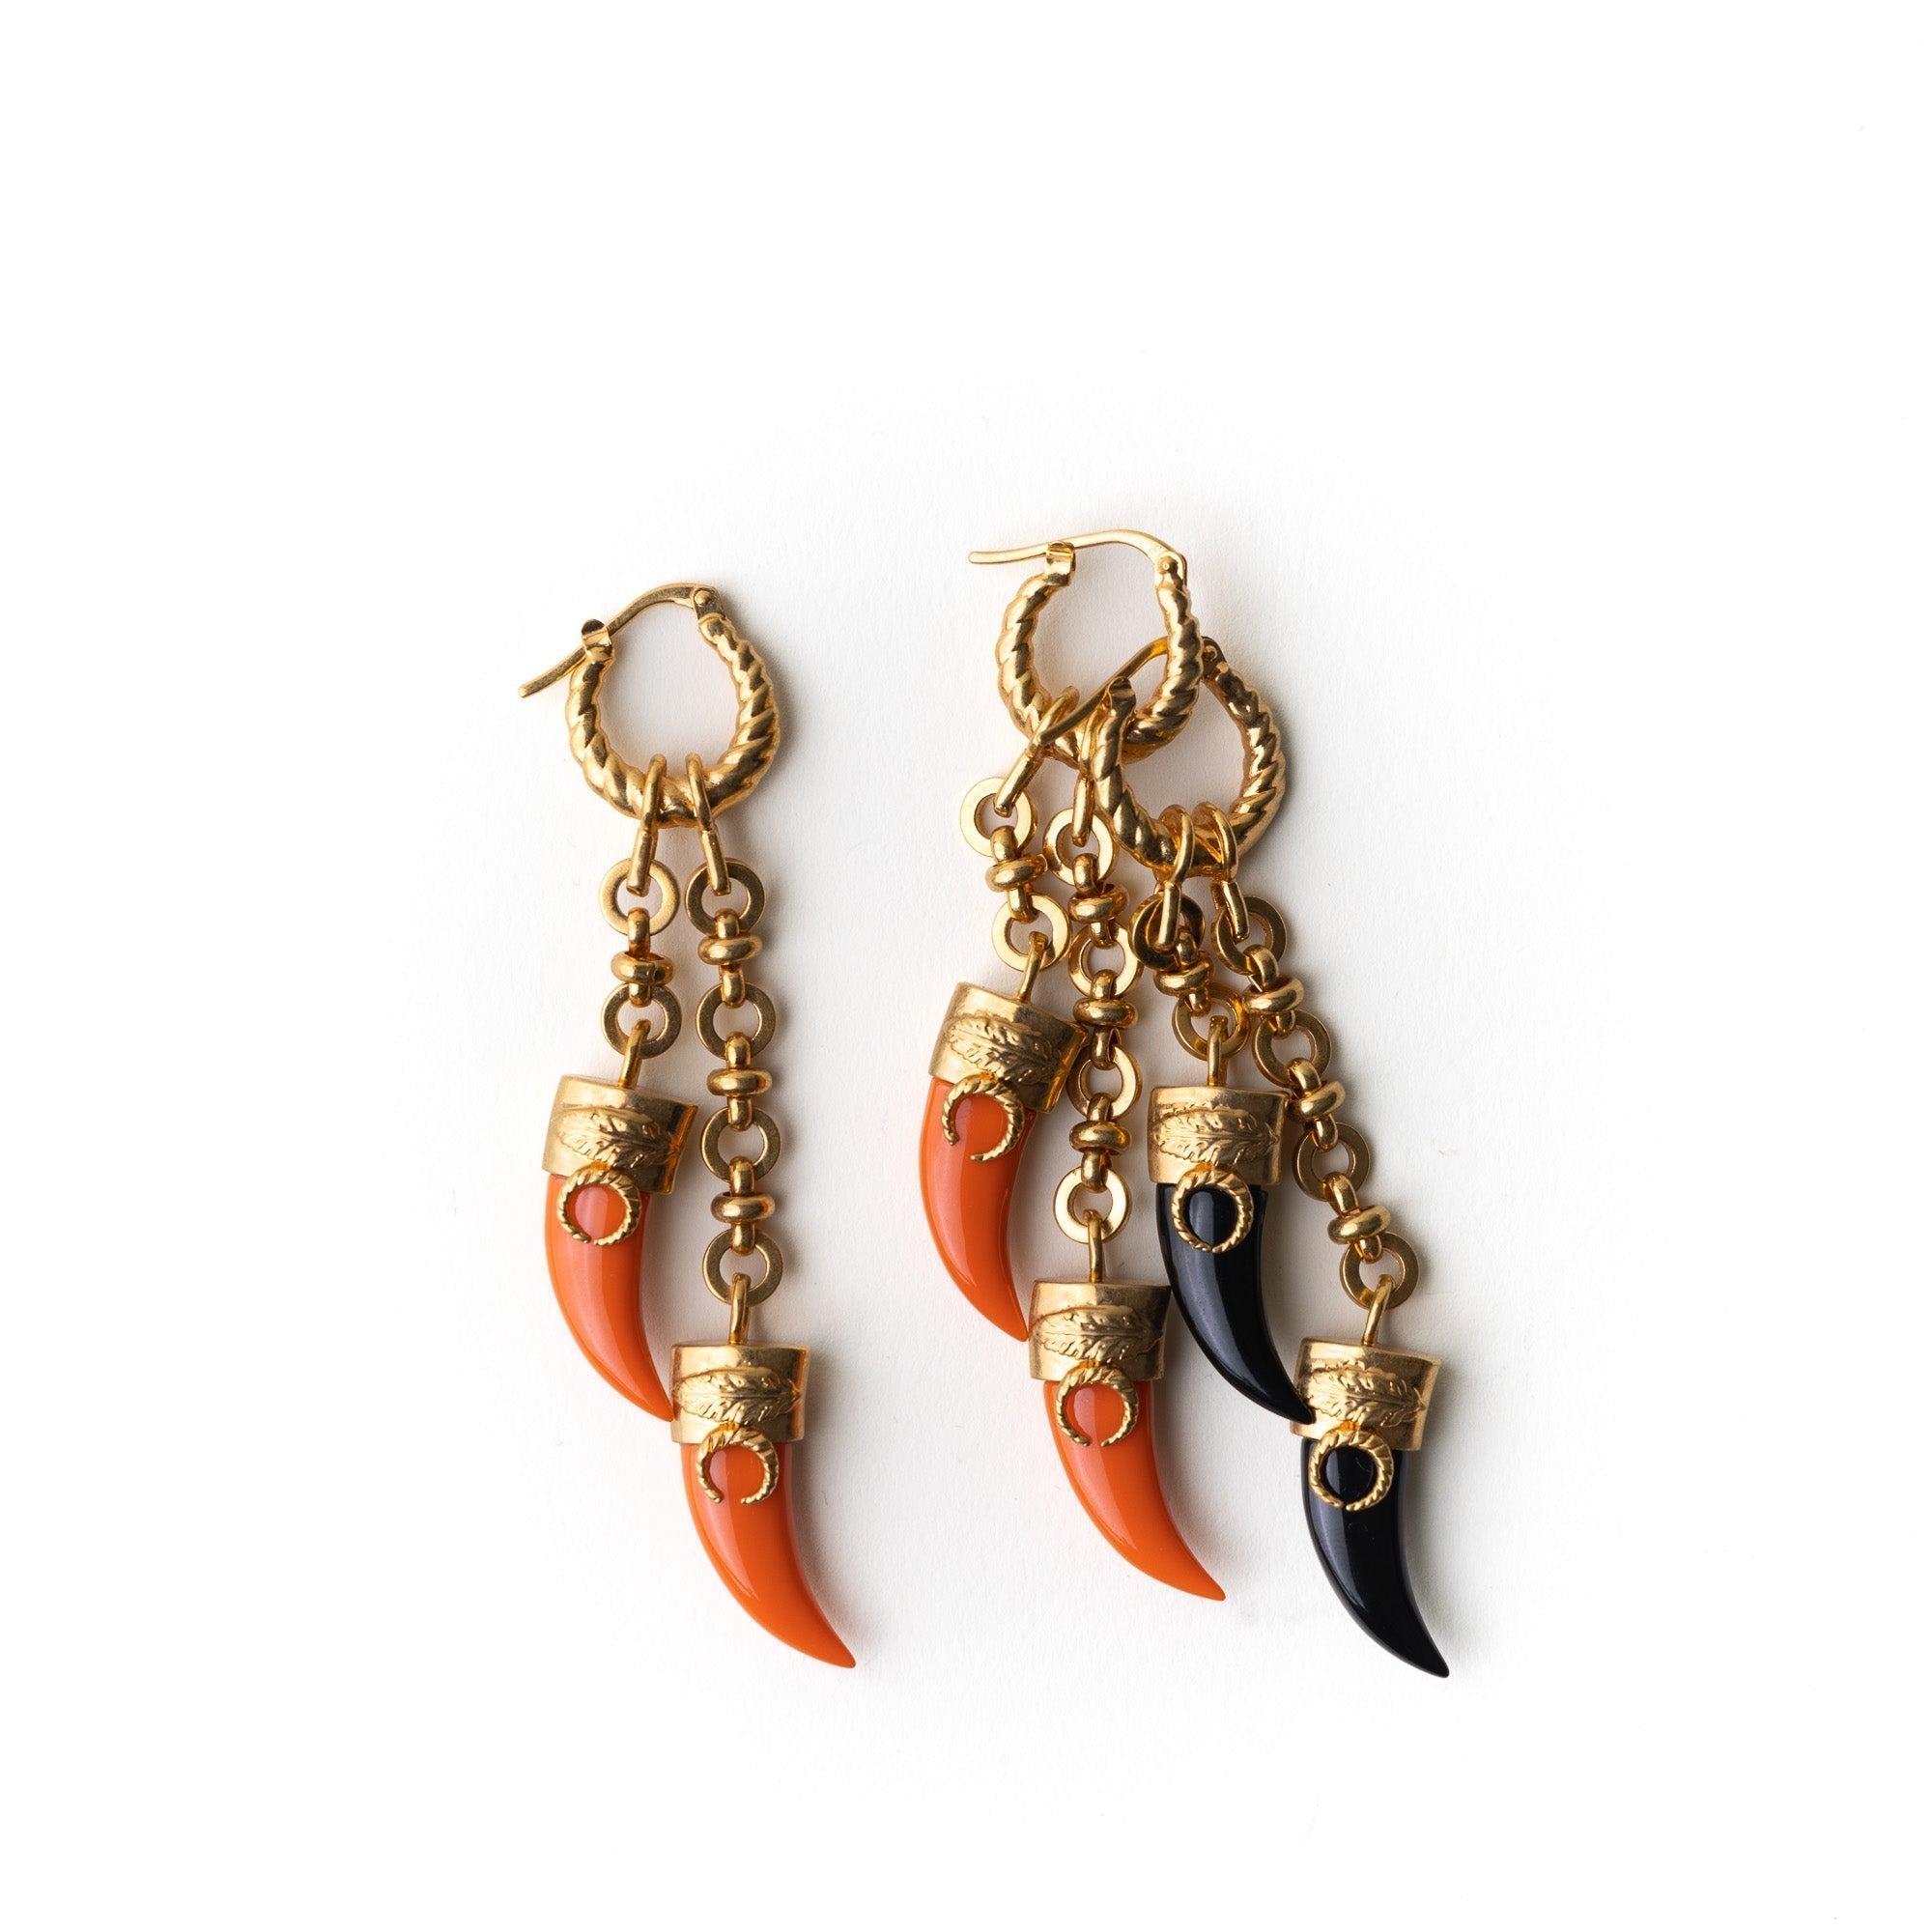 Kabila earring-ONE Earring only-coral or onyx Sonia Petroff 